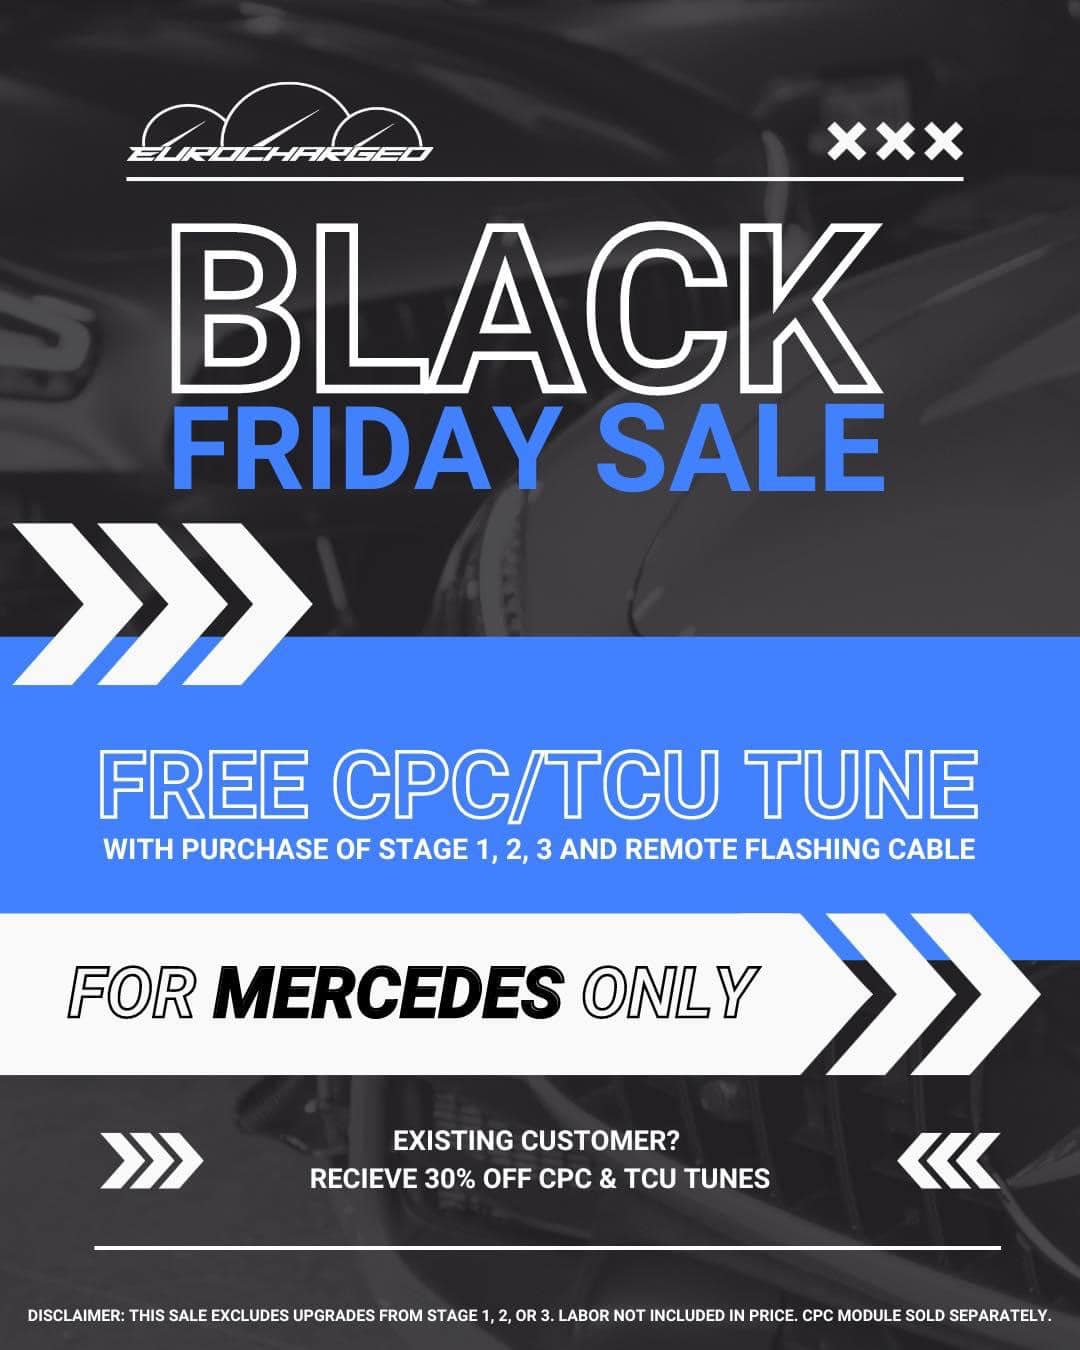 Eurocharged Black Friday Sale